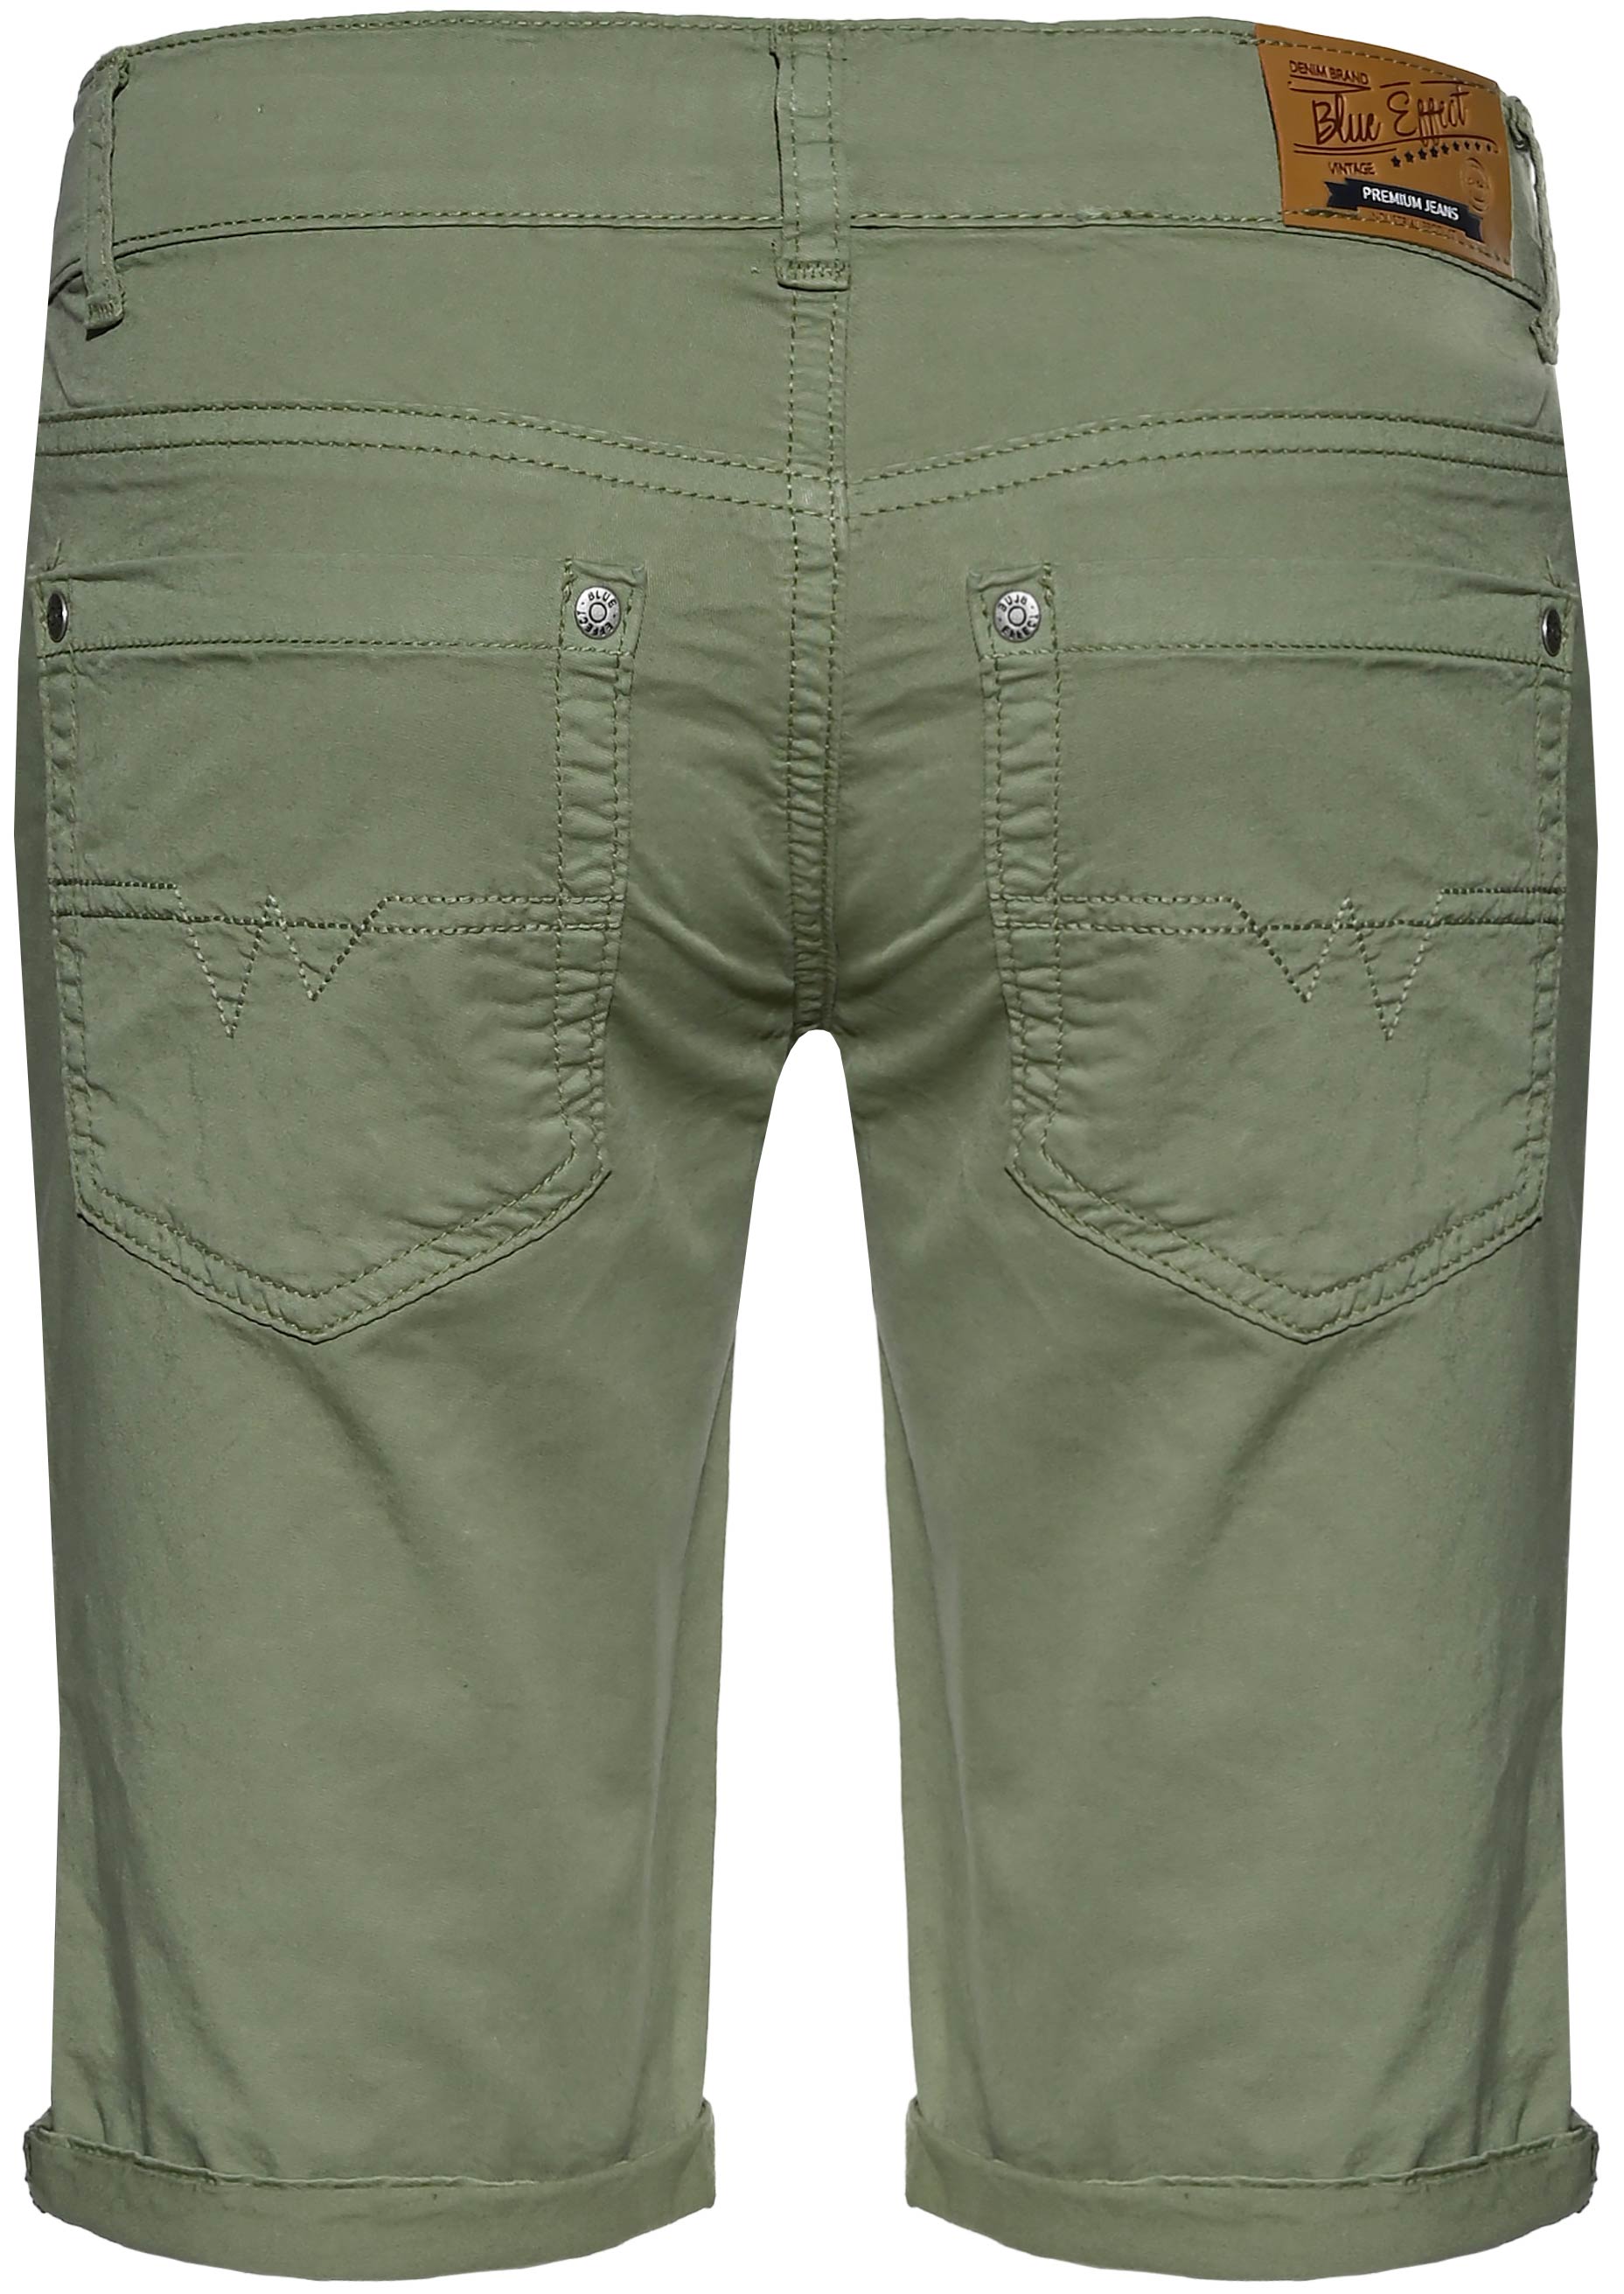 4273-Boys Short available in slim, normal, wide